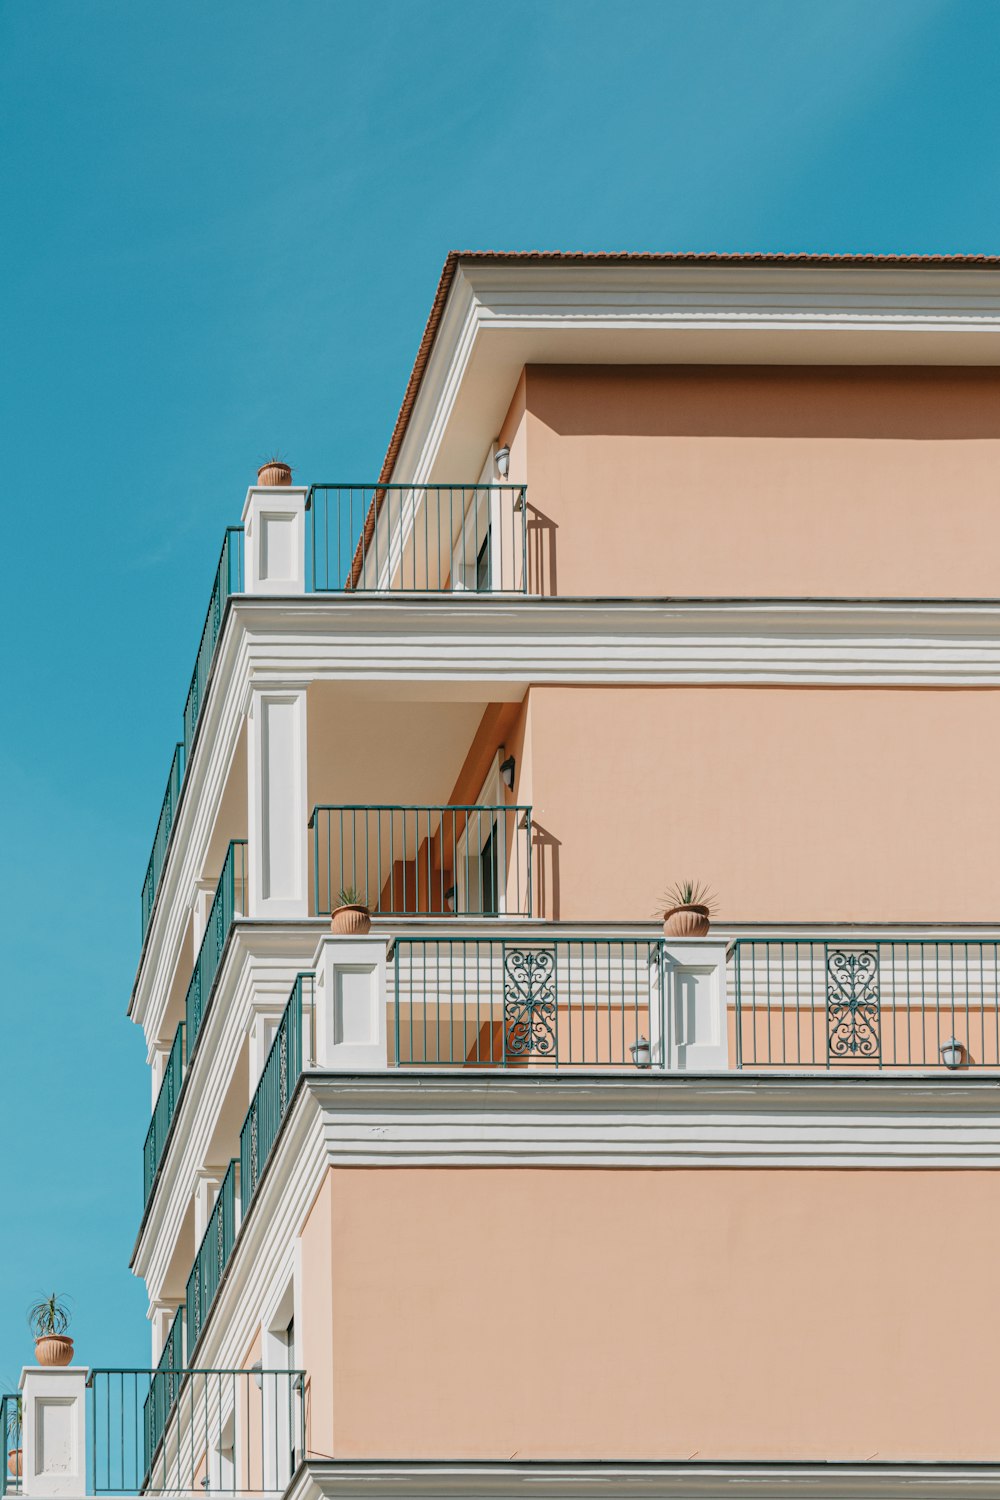 a pink building with balconies and balconies on the balconies